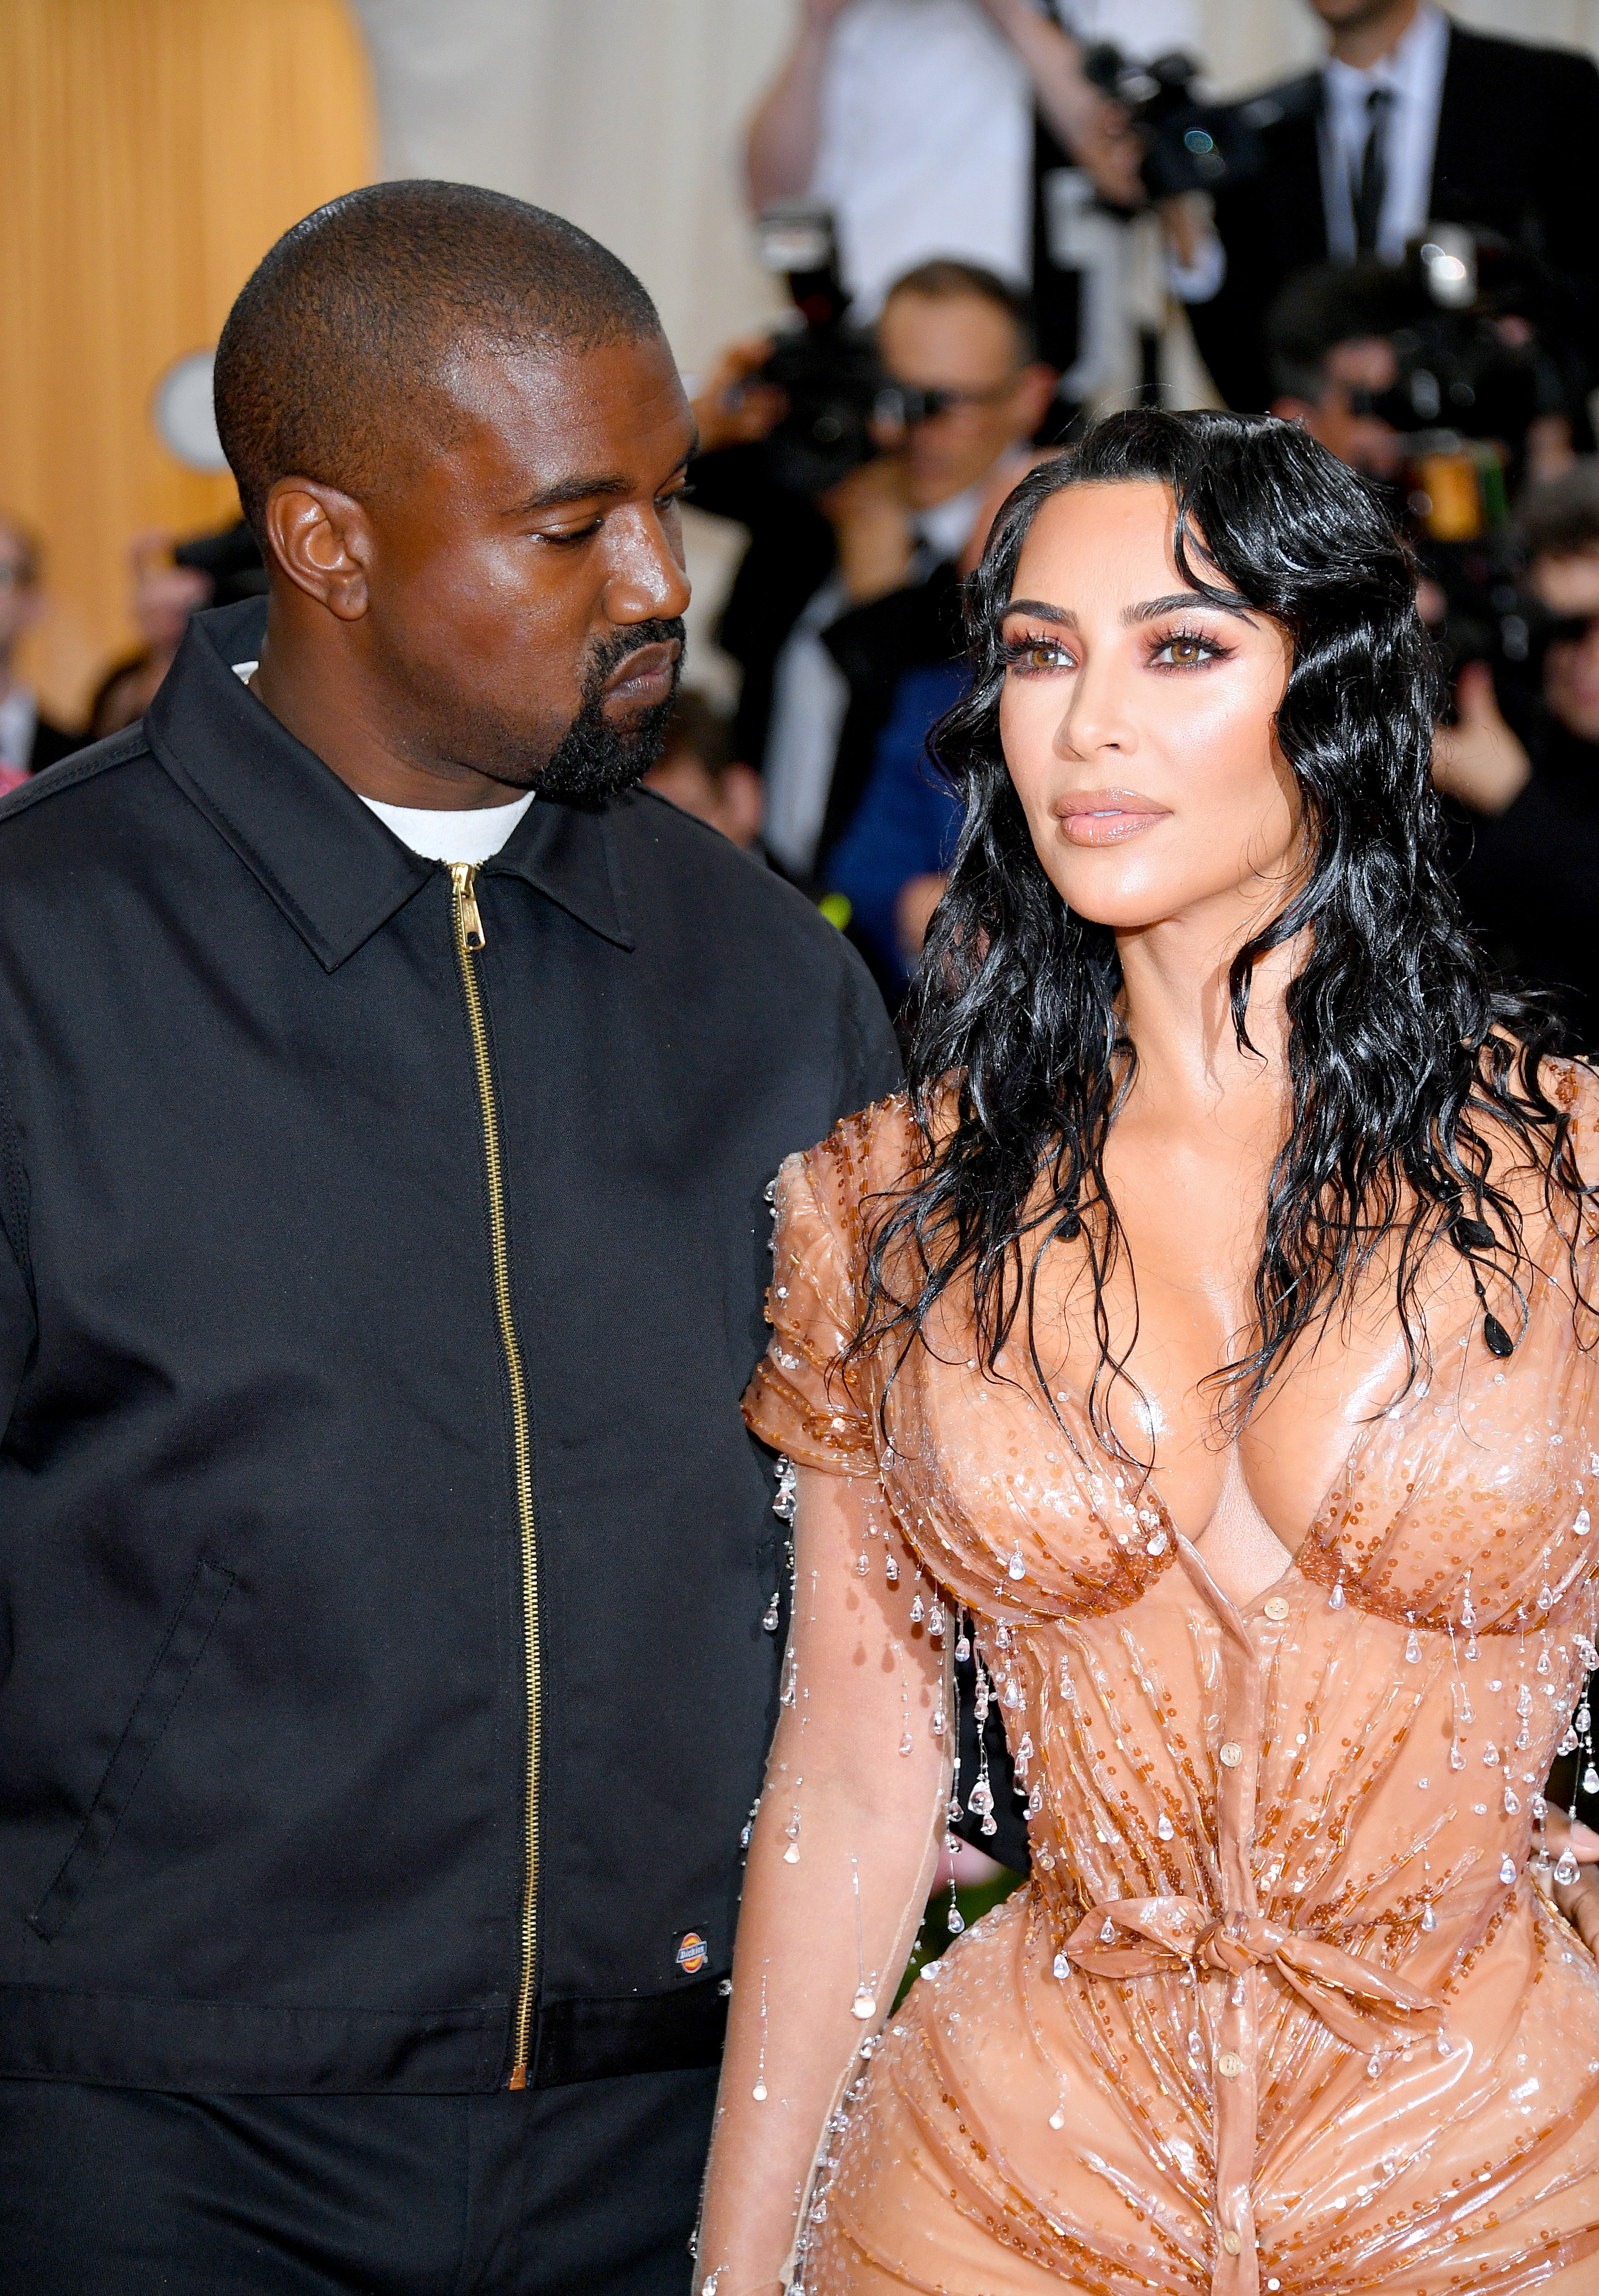 Close-up of Ye and Kim